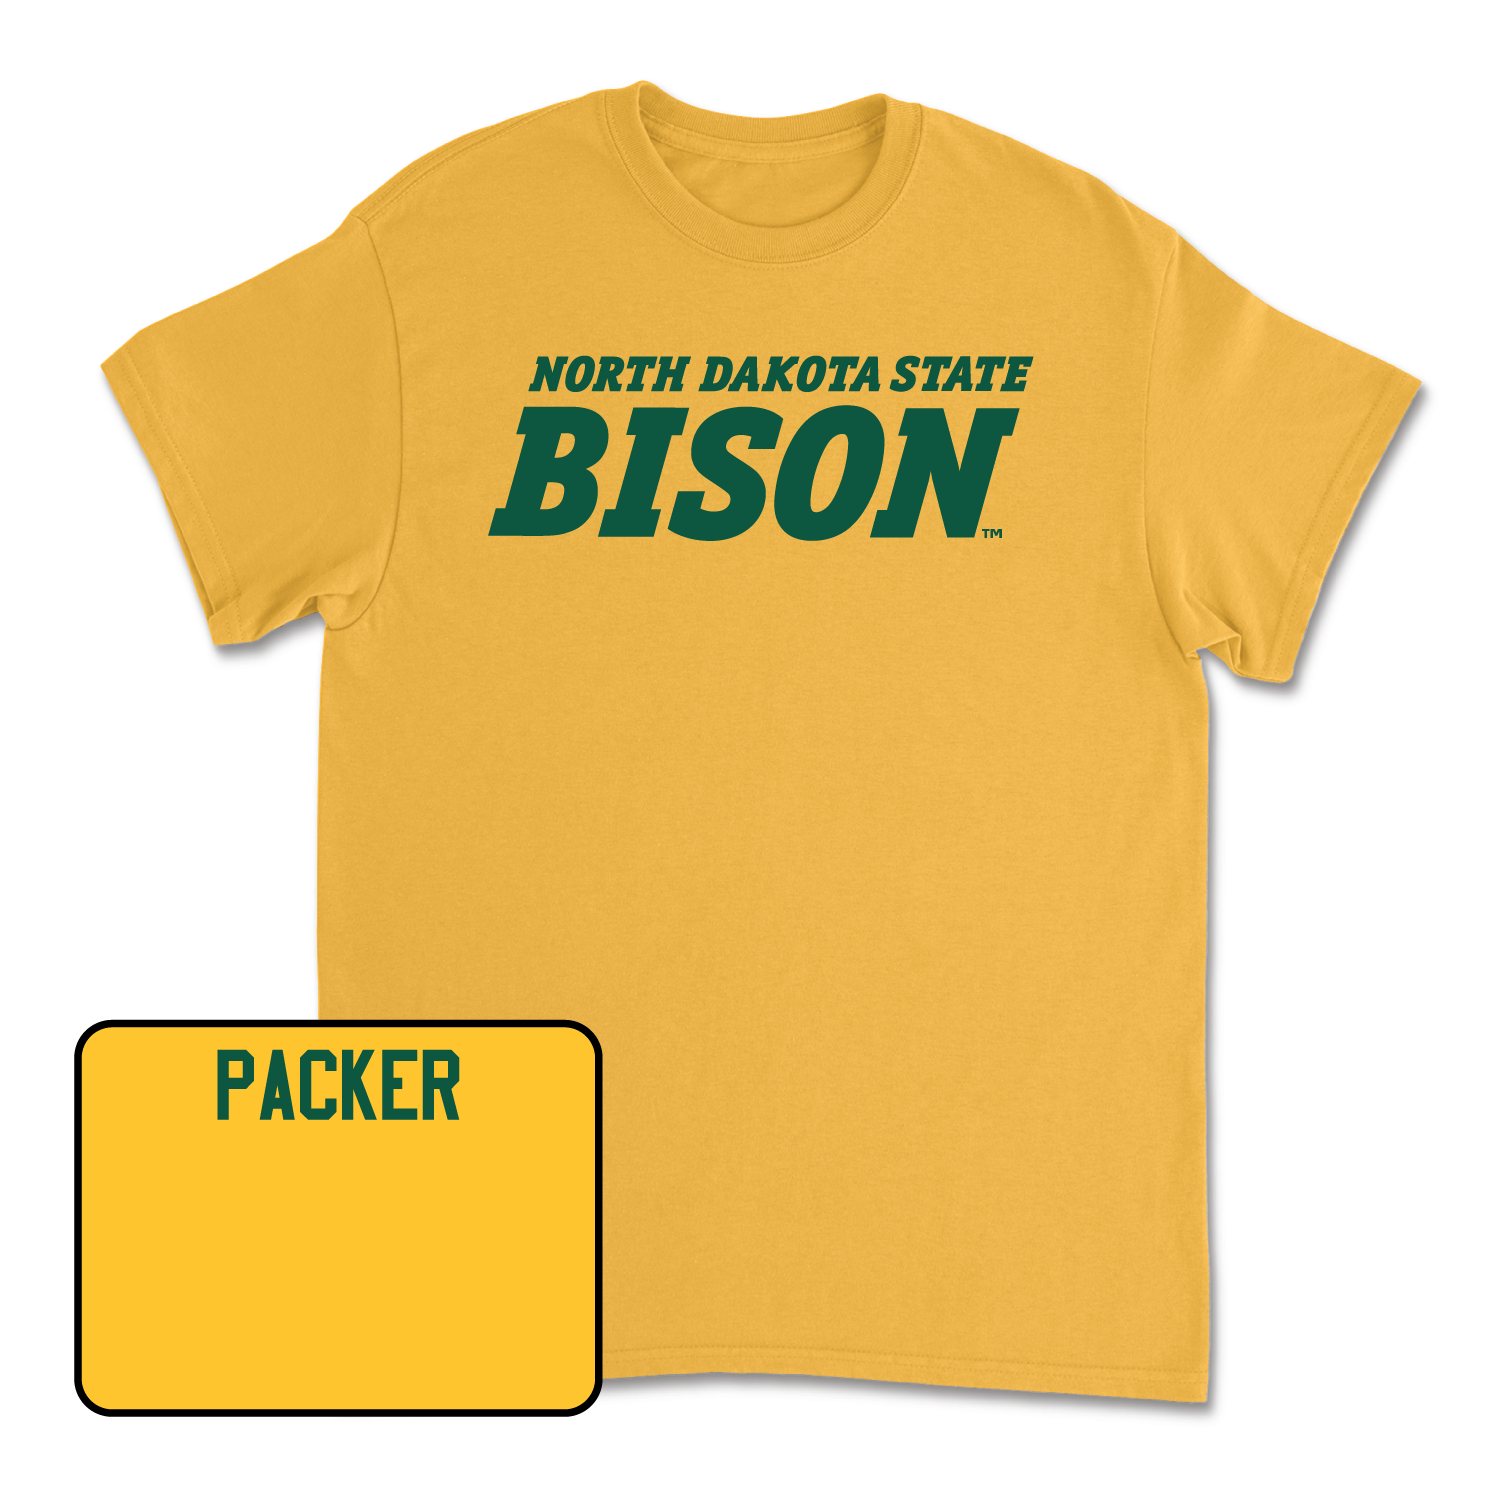 Gold Track & Field Bison Tee Small / Jack Packer